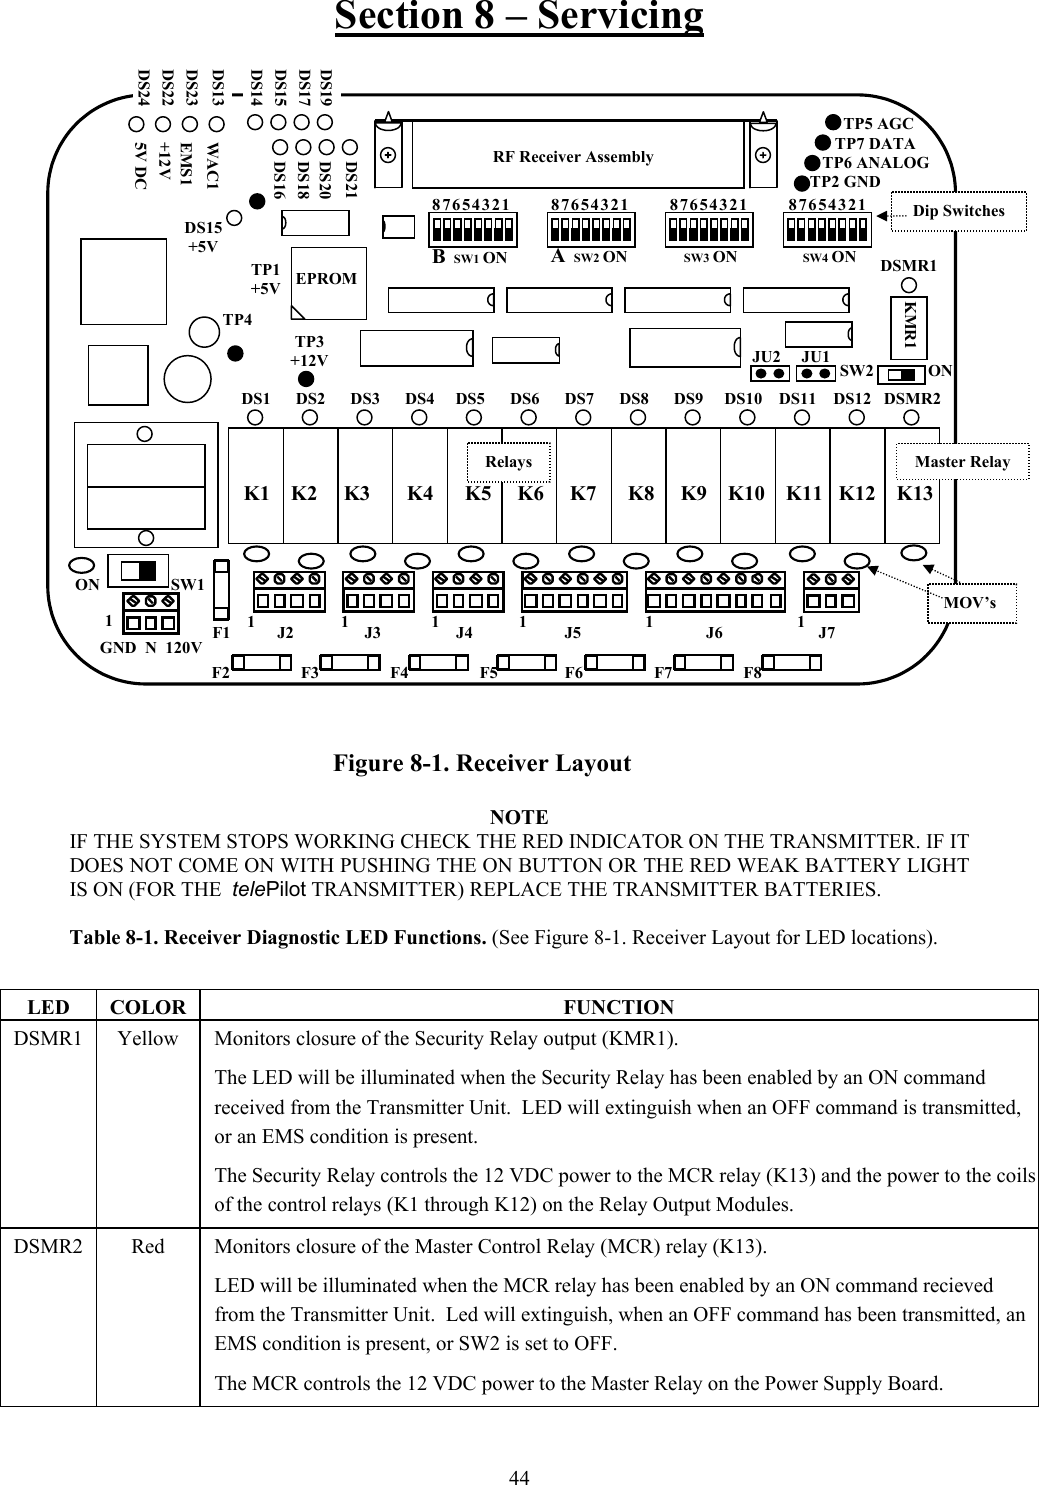 Section 8 – Servicing  44                   NOTE IF THE SYSTEM STOPS WORKING CHECK THE RED INDICATOR ON THE TRANSMITTER. IF IT DOES NOT COME ON WITH PUSHING THE ON BUTTON OR THE RED WEAK BATTERY LIGHT IS ON (FOR THE  telePilot TRANSMITTER) REPLACE THE TRANSMITTER BATTERIES.  Table 8-1. Receiver Diagnostic LED Functions. (See Figure 8-1. Receiver Layout for LED locations).  LED COLOR  FUNCTION DSMR1  Yellow  Monitors closure of the Security Relay output (KMR1). The LED will be illuminated when the Security Relay has been enabled by an ON command received from the Transmitter Unit.  LED will extinguish when an OFF command is transmitted, or an EMS condition is present. The Security Relay controls the 12 VDC power to the MCR relay (K13) and the power to the coils of the control relays (K1 through K12) on the Relay Output Modules. DSMR2  Red  Monitors closure of the Master Control Relay (MCR) relay (K13). LED will be illuminated when the MCR relay has been enabled by an ON command recieved from the Transmitter Unit.  Led will extinguish, when an OFF command has been transmitted, an EMS condition is present, or SW2 is set to OFF. The MCR controls the 12 VDC power to the Master Relay on the Power Supply Board. GND  N  120V  F1 8 7 6 5 4 3 2 1 8 7 6 5 4 3 2 1 8 7 6 5 4 3 2 1 8 7 6 5 4 3 2 1 SW4 ON   SW3 ON A  SW2 ON B  SW1 ON DS1      DS2      DS3      DS4     DS5      DS6      DS7      DS8      DS9     DS10    DS11    DS12   DSMR2 TP4              TP5 AGC           TP7 DATA        TP6 ANALOG     TP2 GND   DS13    DS23   DS22   DS24   DS21   DS20  DS18   DS16 TP3 +12V TP1 +5V  DS15 +5V RF Receiver Assembly MOV’s Dip Switches  KMR1 EPROM WAC1    EMS1  +12V   5V DC  K1    K2     K3       K4      K5     K6     K7      K8     K9    K10    K11   K12    K13 DSMR1 SW2             ON   ON                 SW1 DS19   DS17   DS15   DS14 F2                 F3                 F4                 F5                F6                 F7                 F8  J2                 J3                  J4                      J5                              J6                       J7 JU2     JU1 Relays  Master Relay 1 1 1 1 1 1 1Figure 8-1. Receiver Layout 